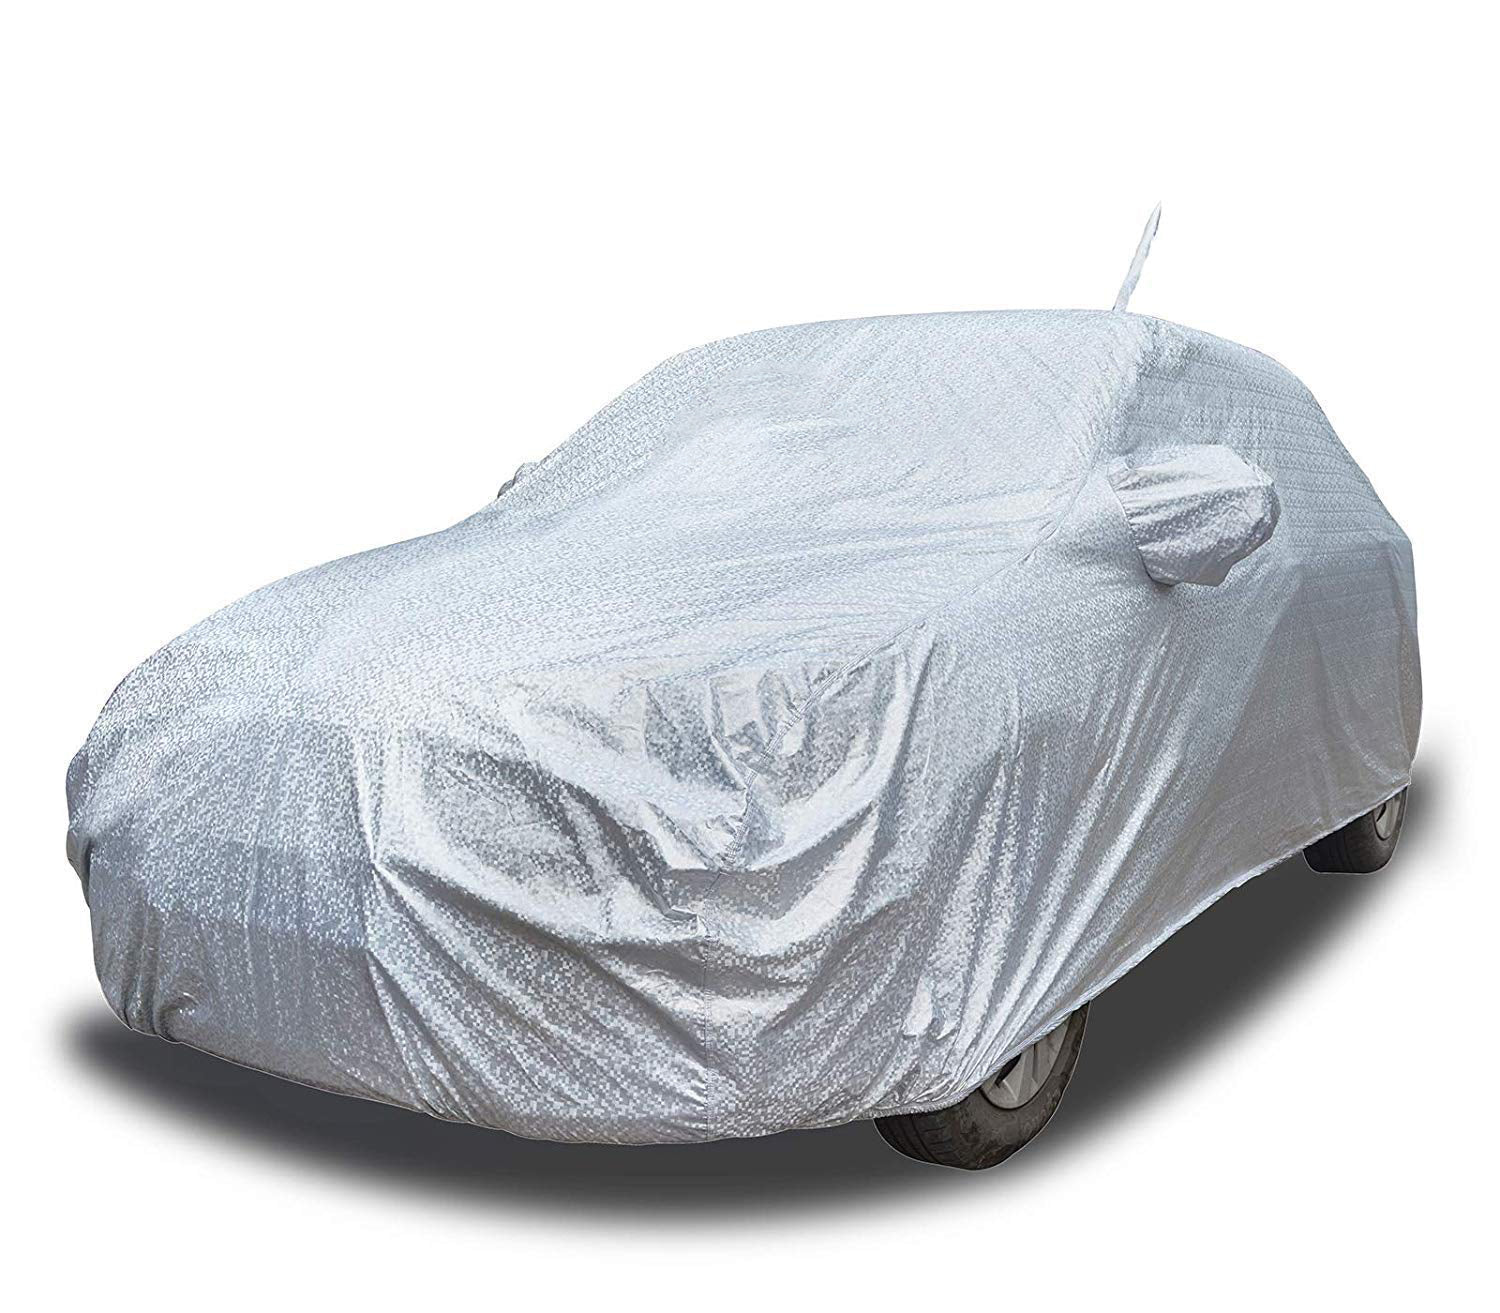 Buy Volkswagen Polo Car Body Cover ARIL Series Online